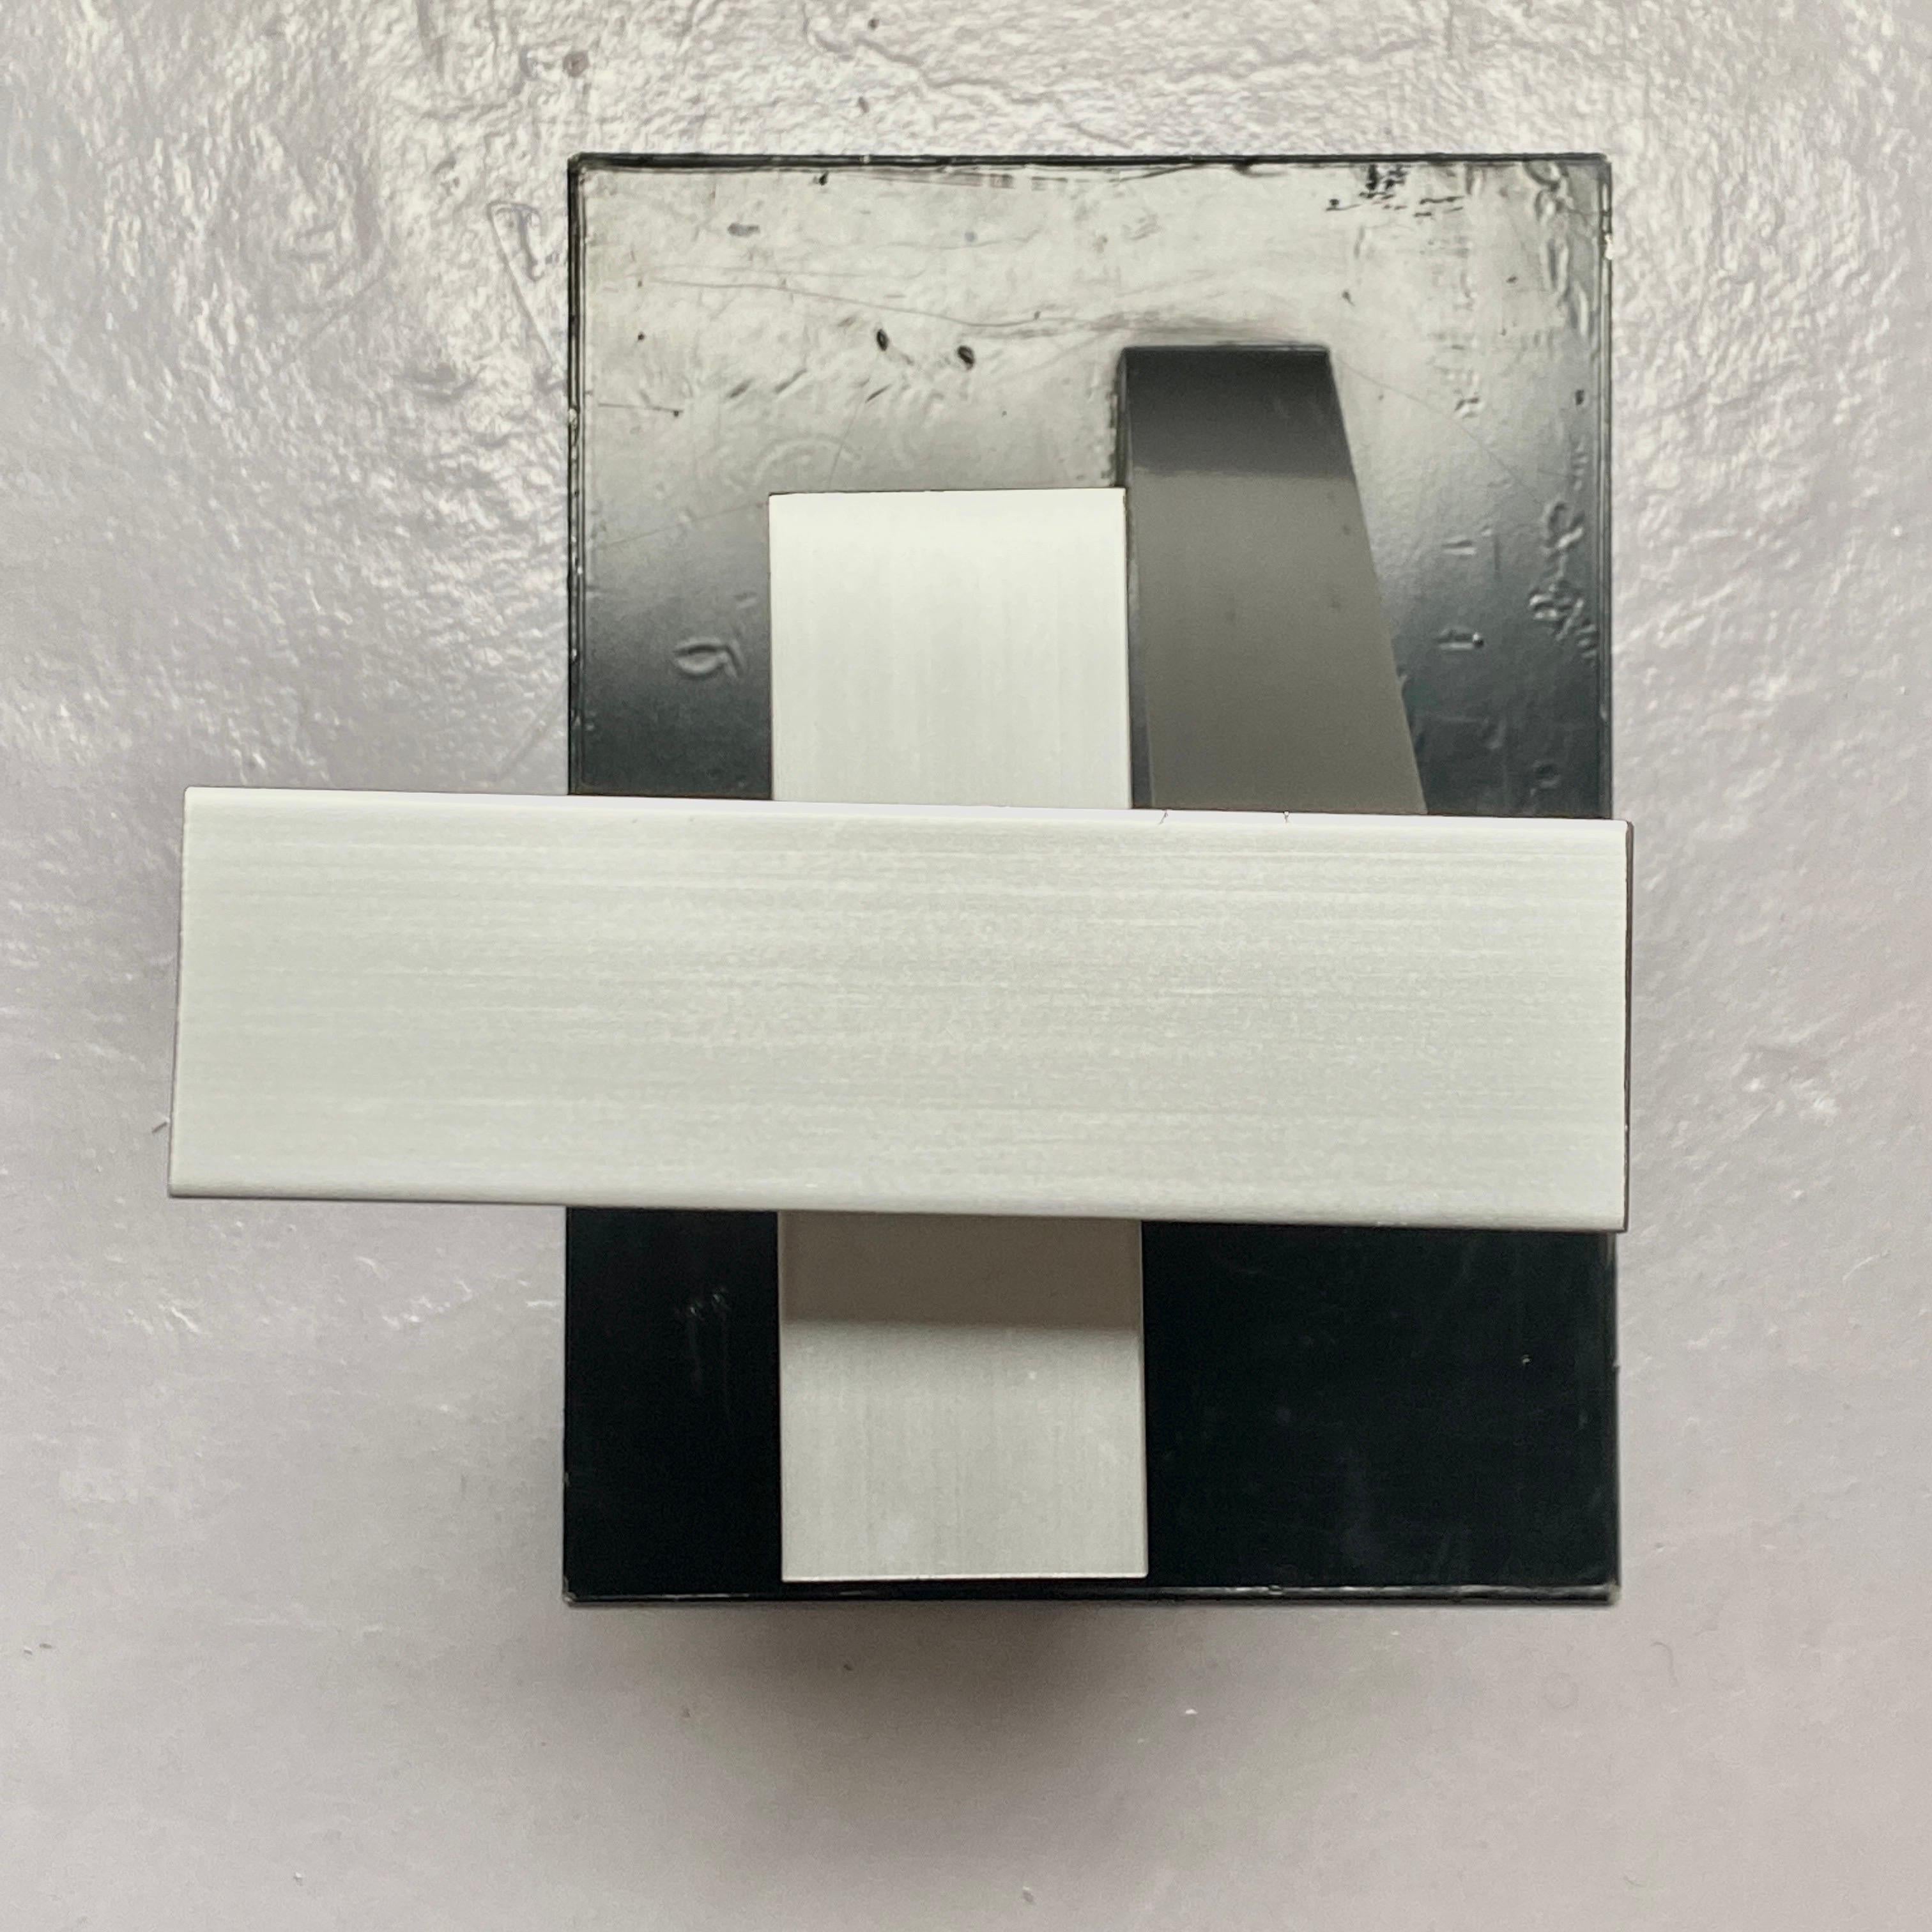 20th Century Abstract minimalist geometric sculpture in aluminum, 1970s For Sale